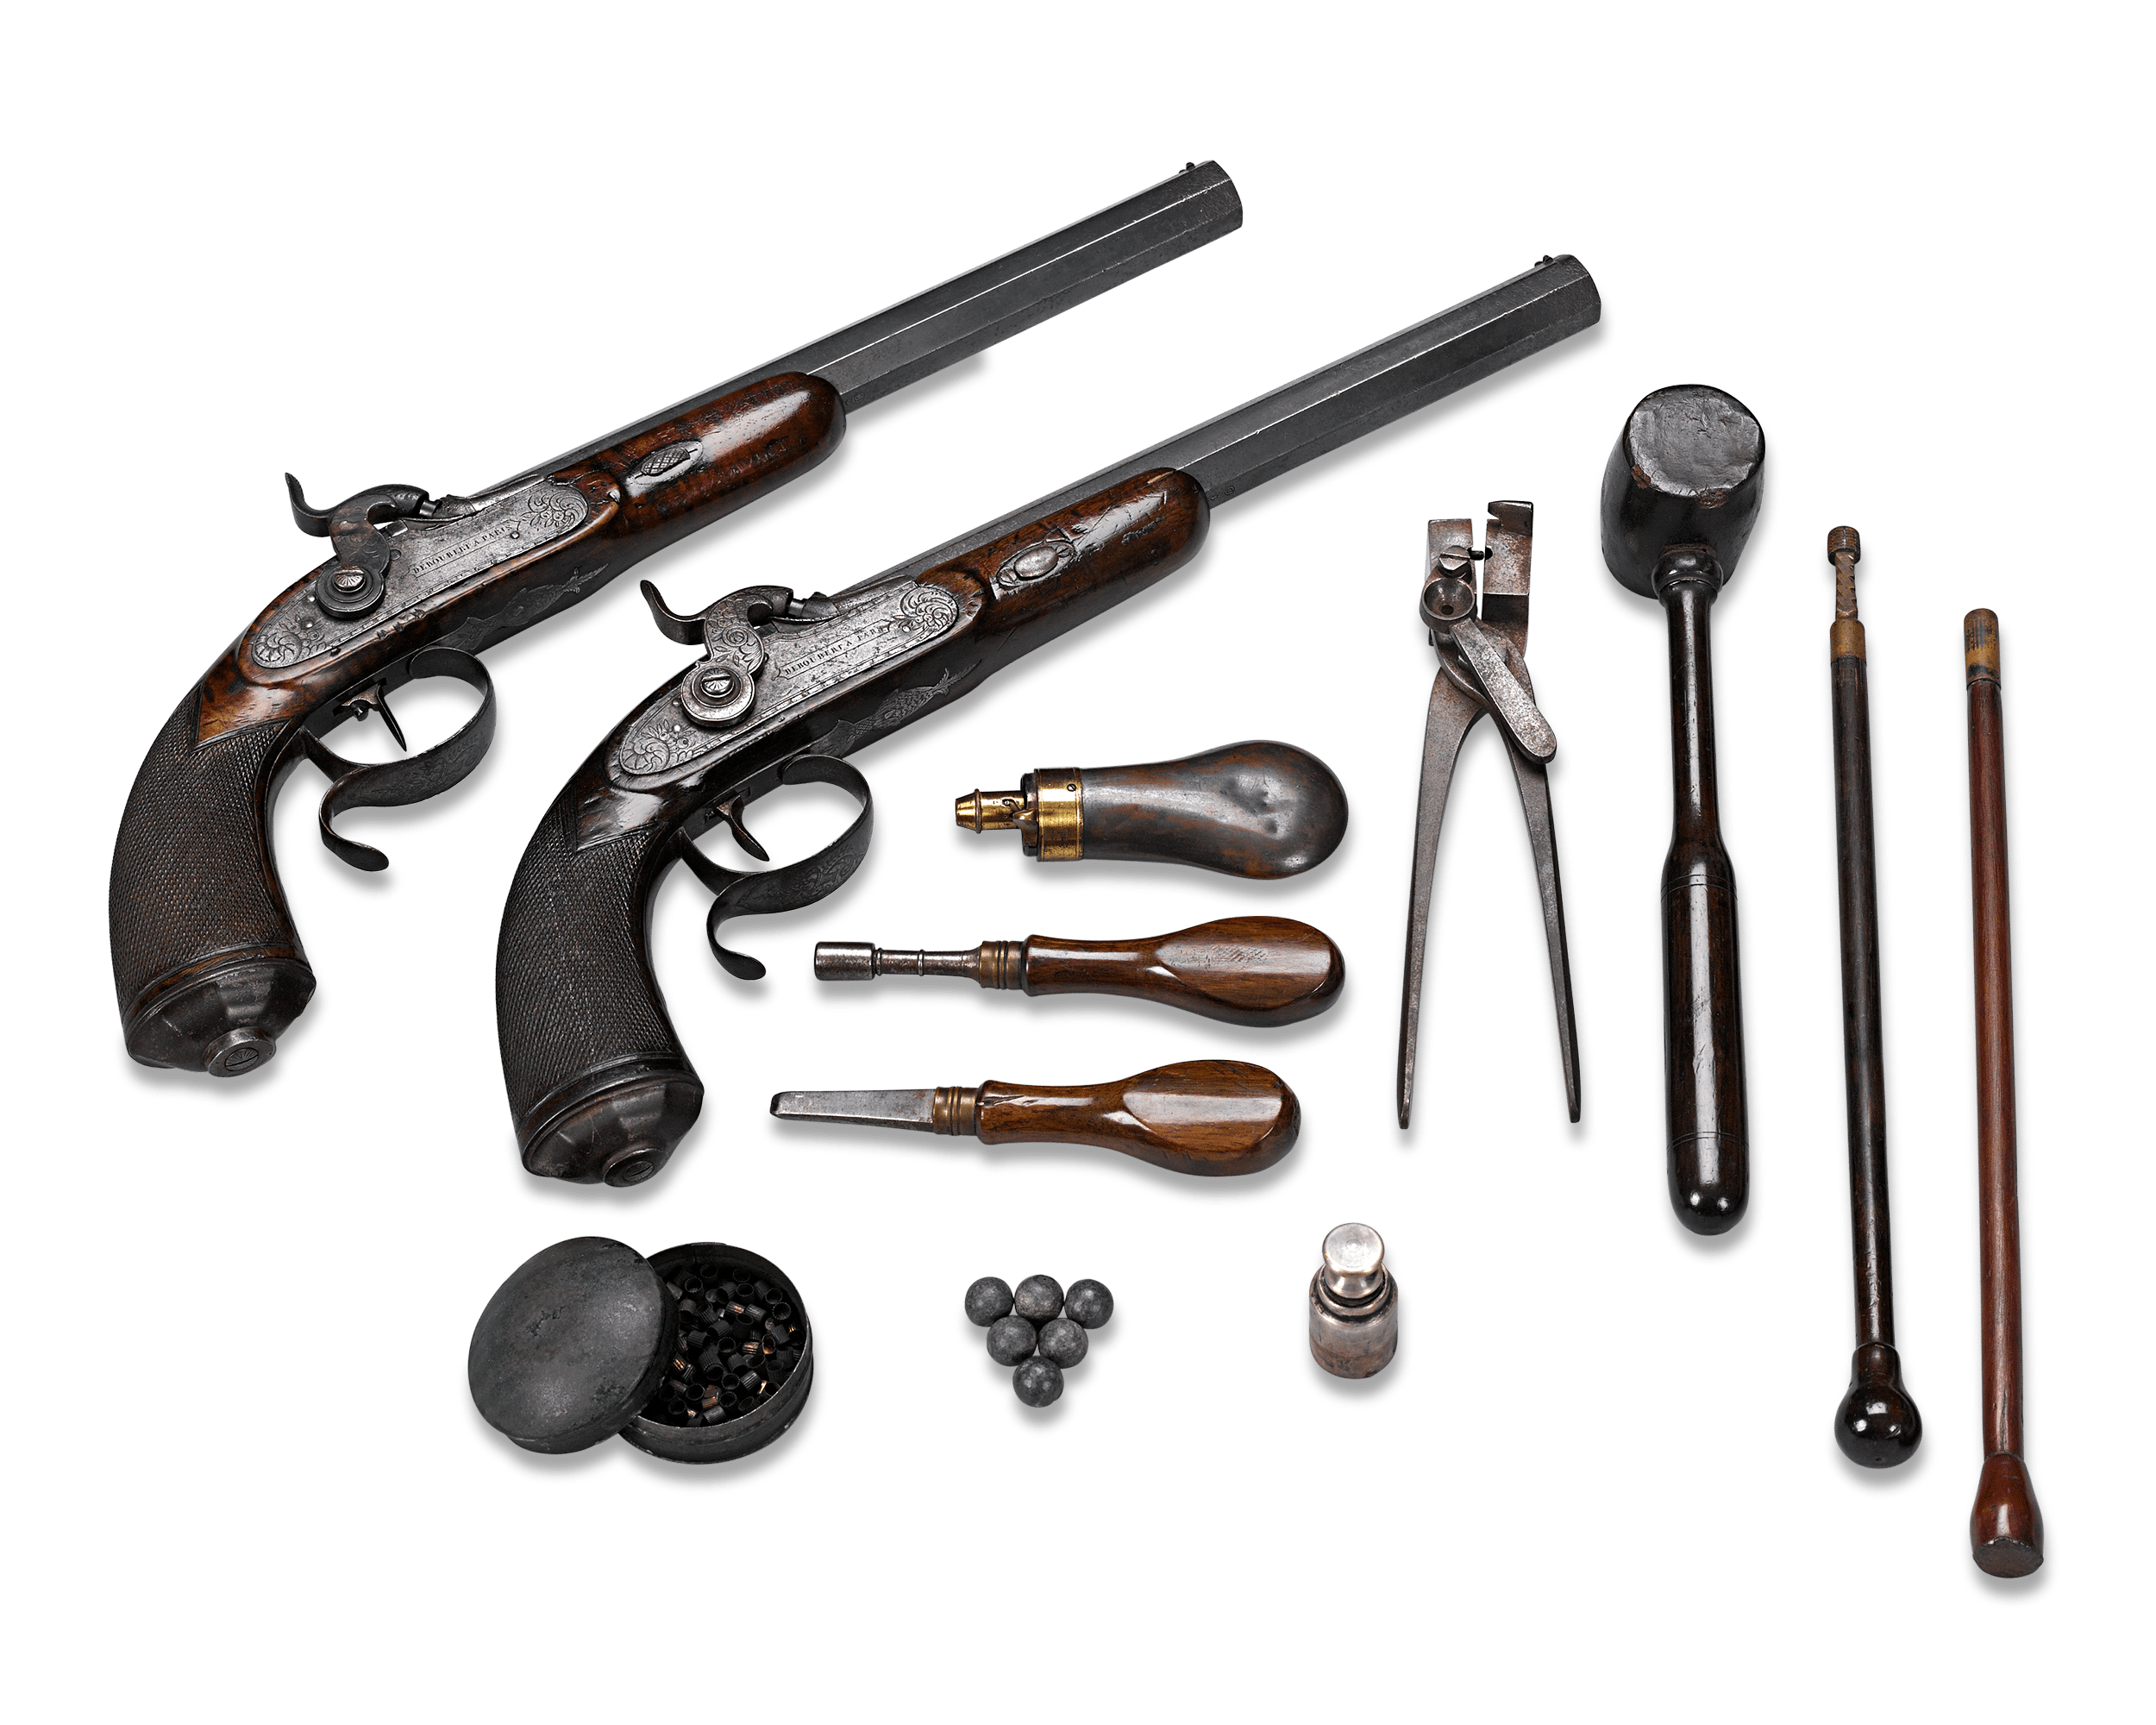 It is seldom that a pair of 19th-century dueling pistols are found in such complete condition